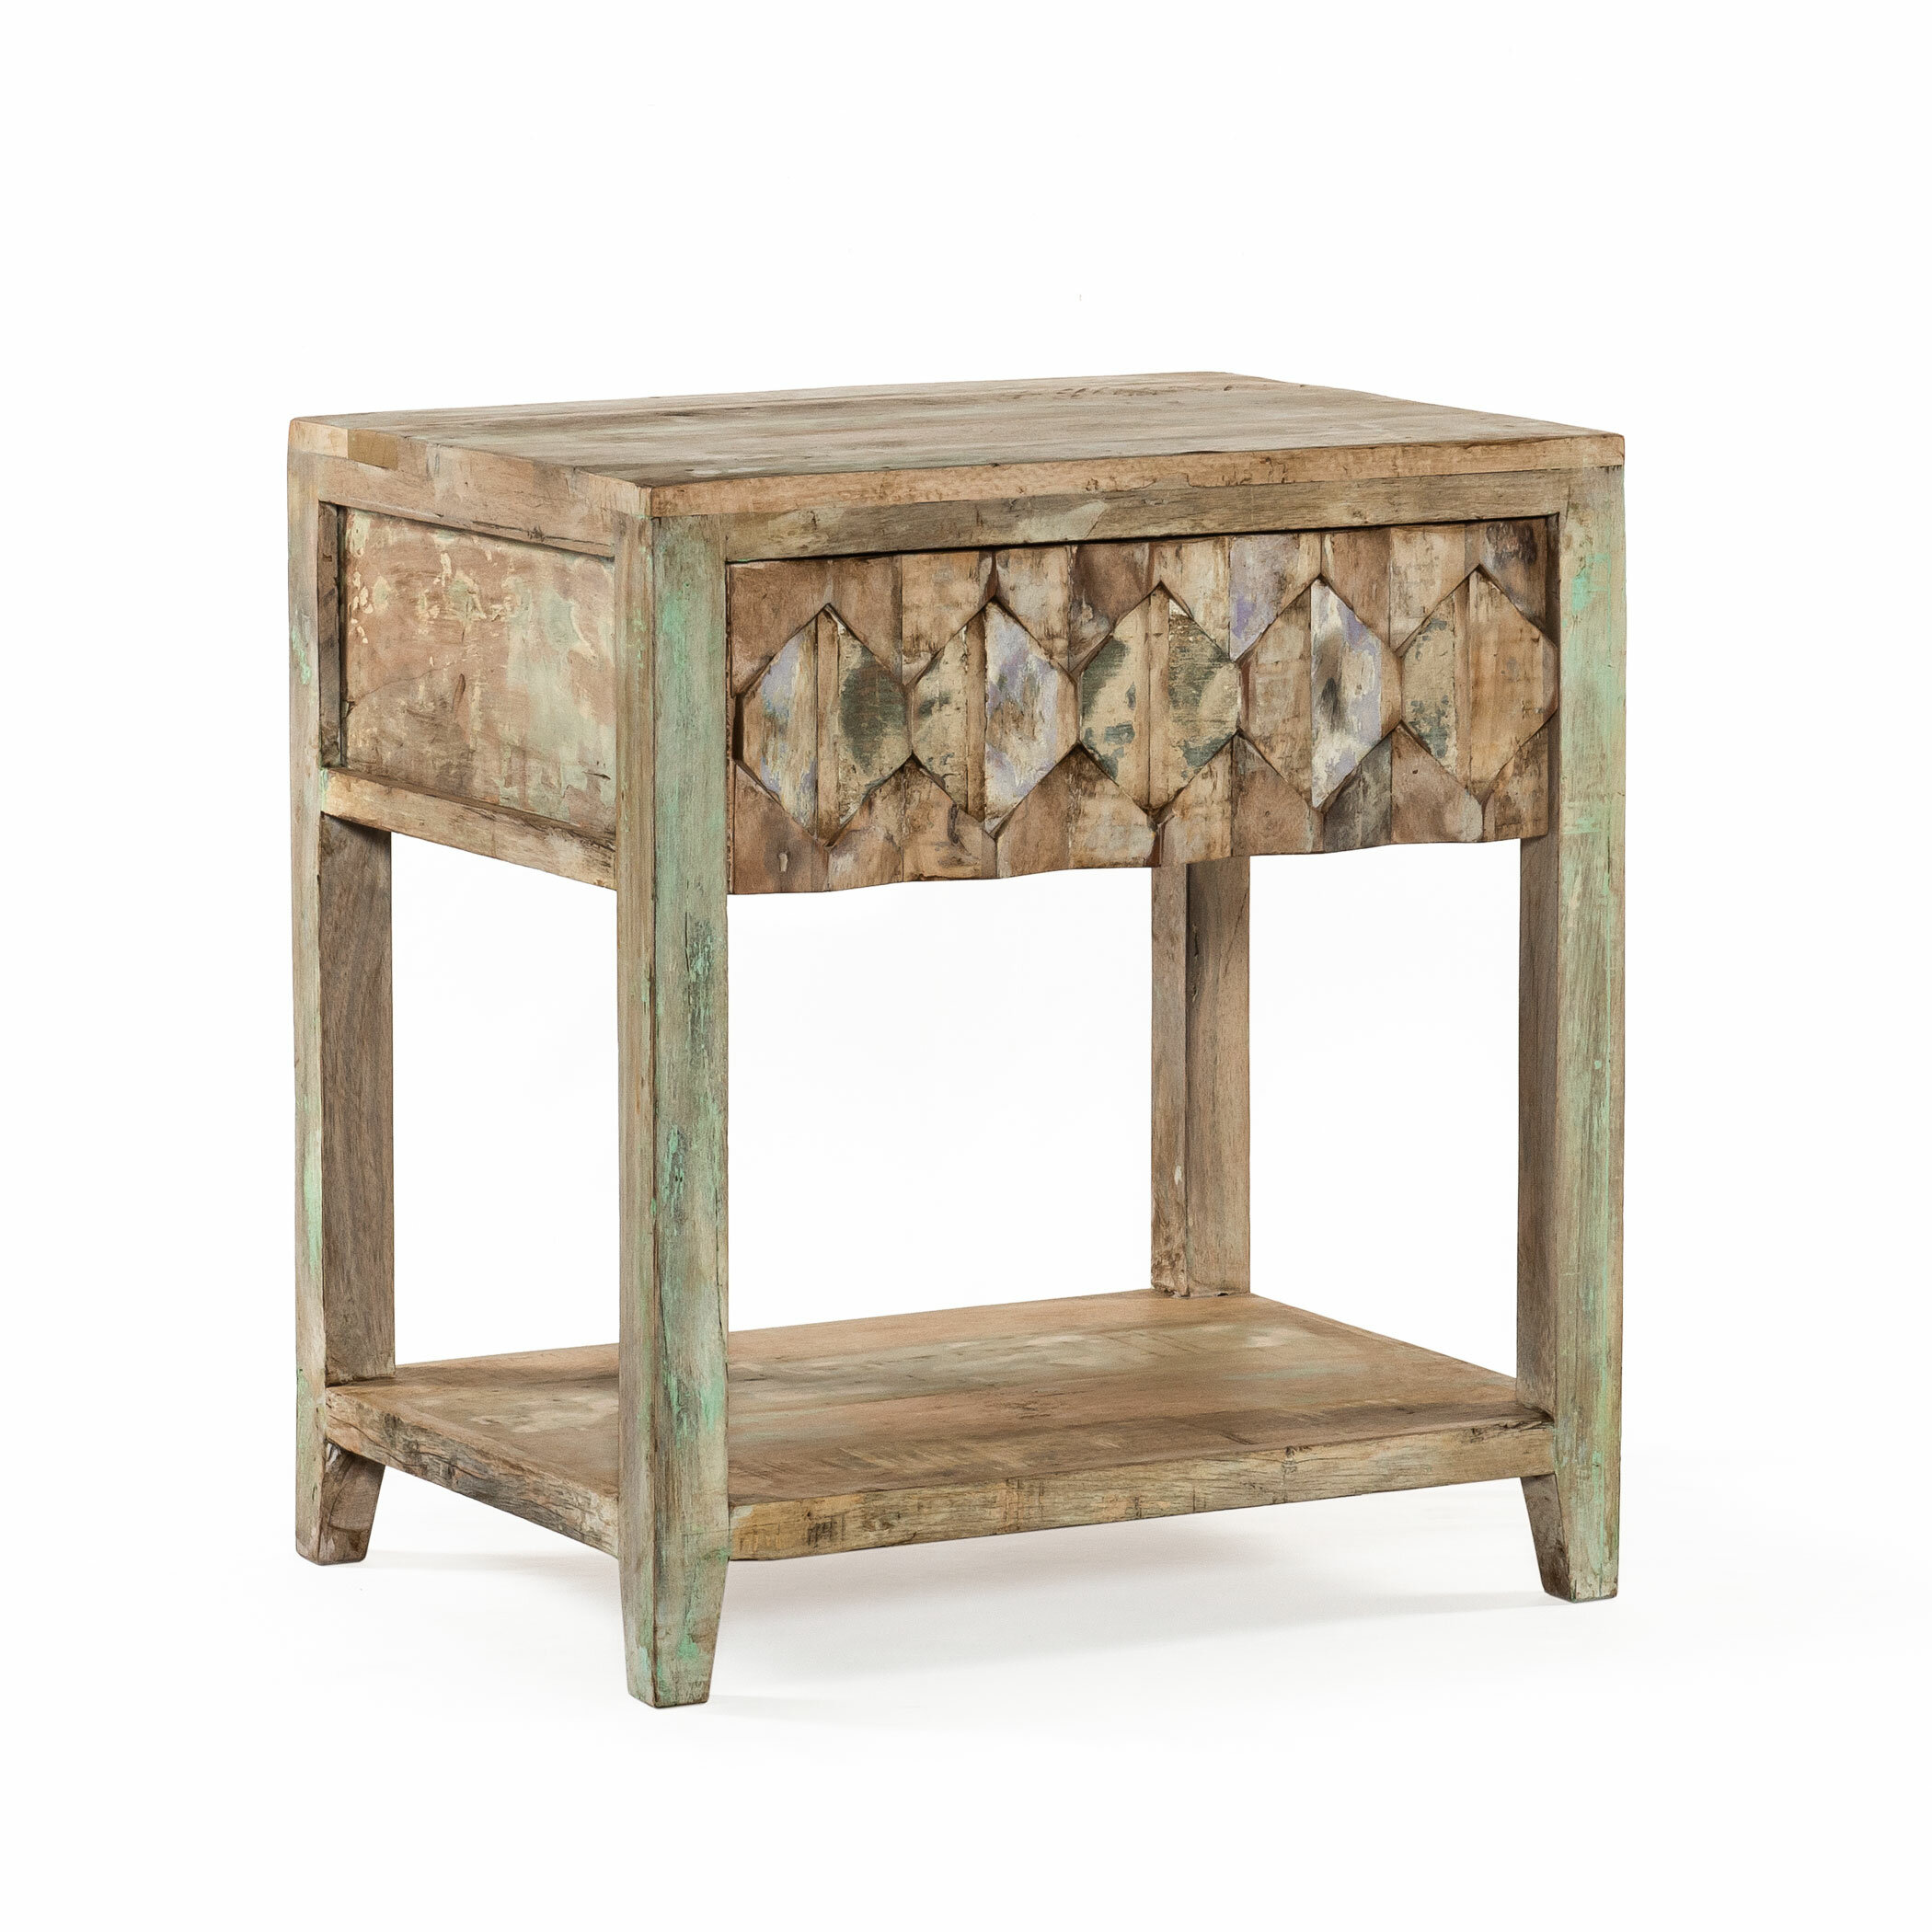 Lasting Quality & Design Kiln-dried & Hand-Crafted Construction Driftwood Montana Collection Natural Hardwood Nightstand End Table Combo 